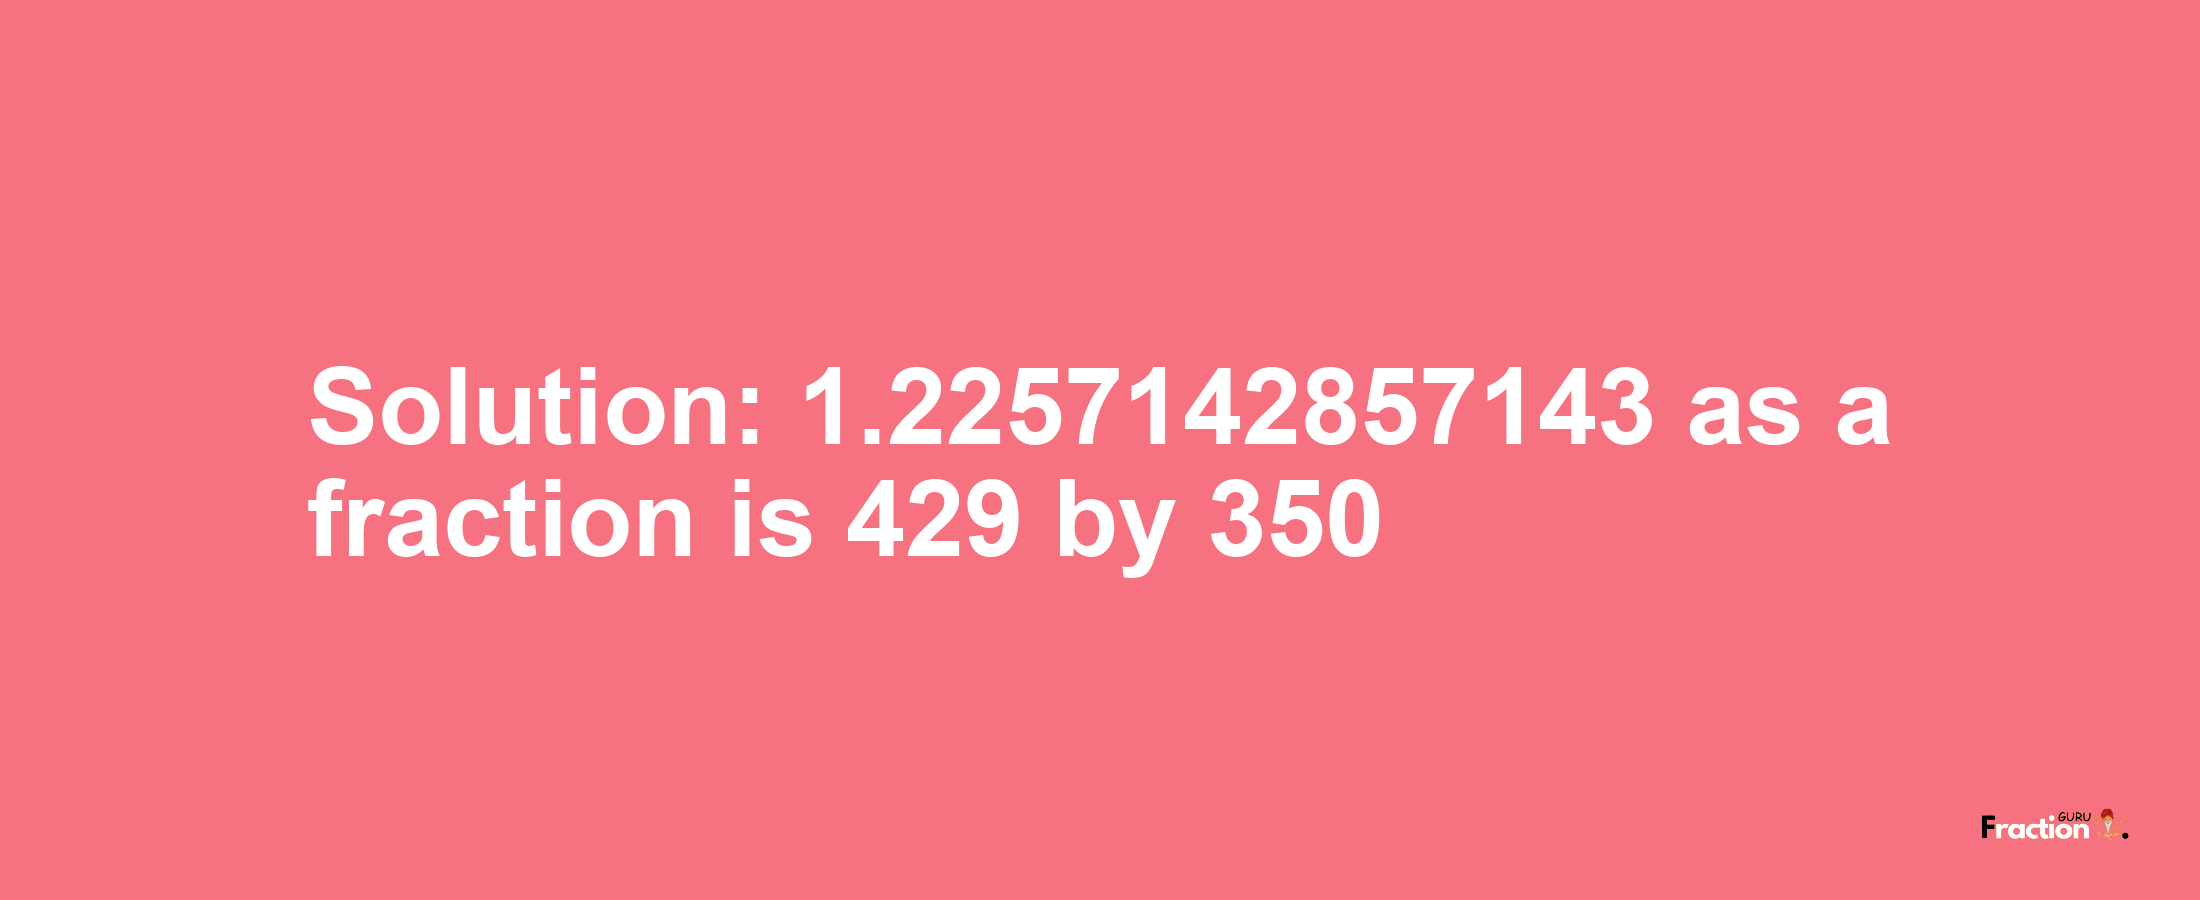 Solution:1.2257142857143 as a fraction is 429/350